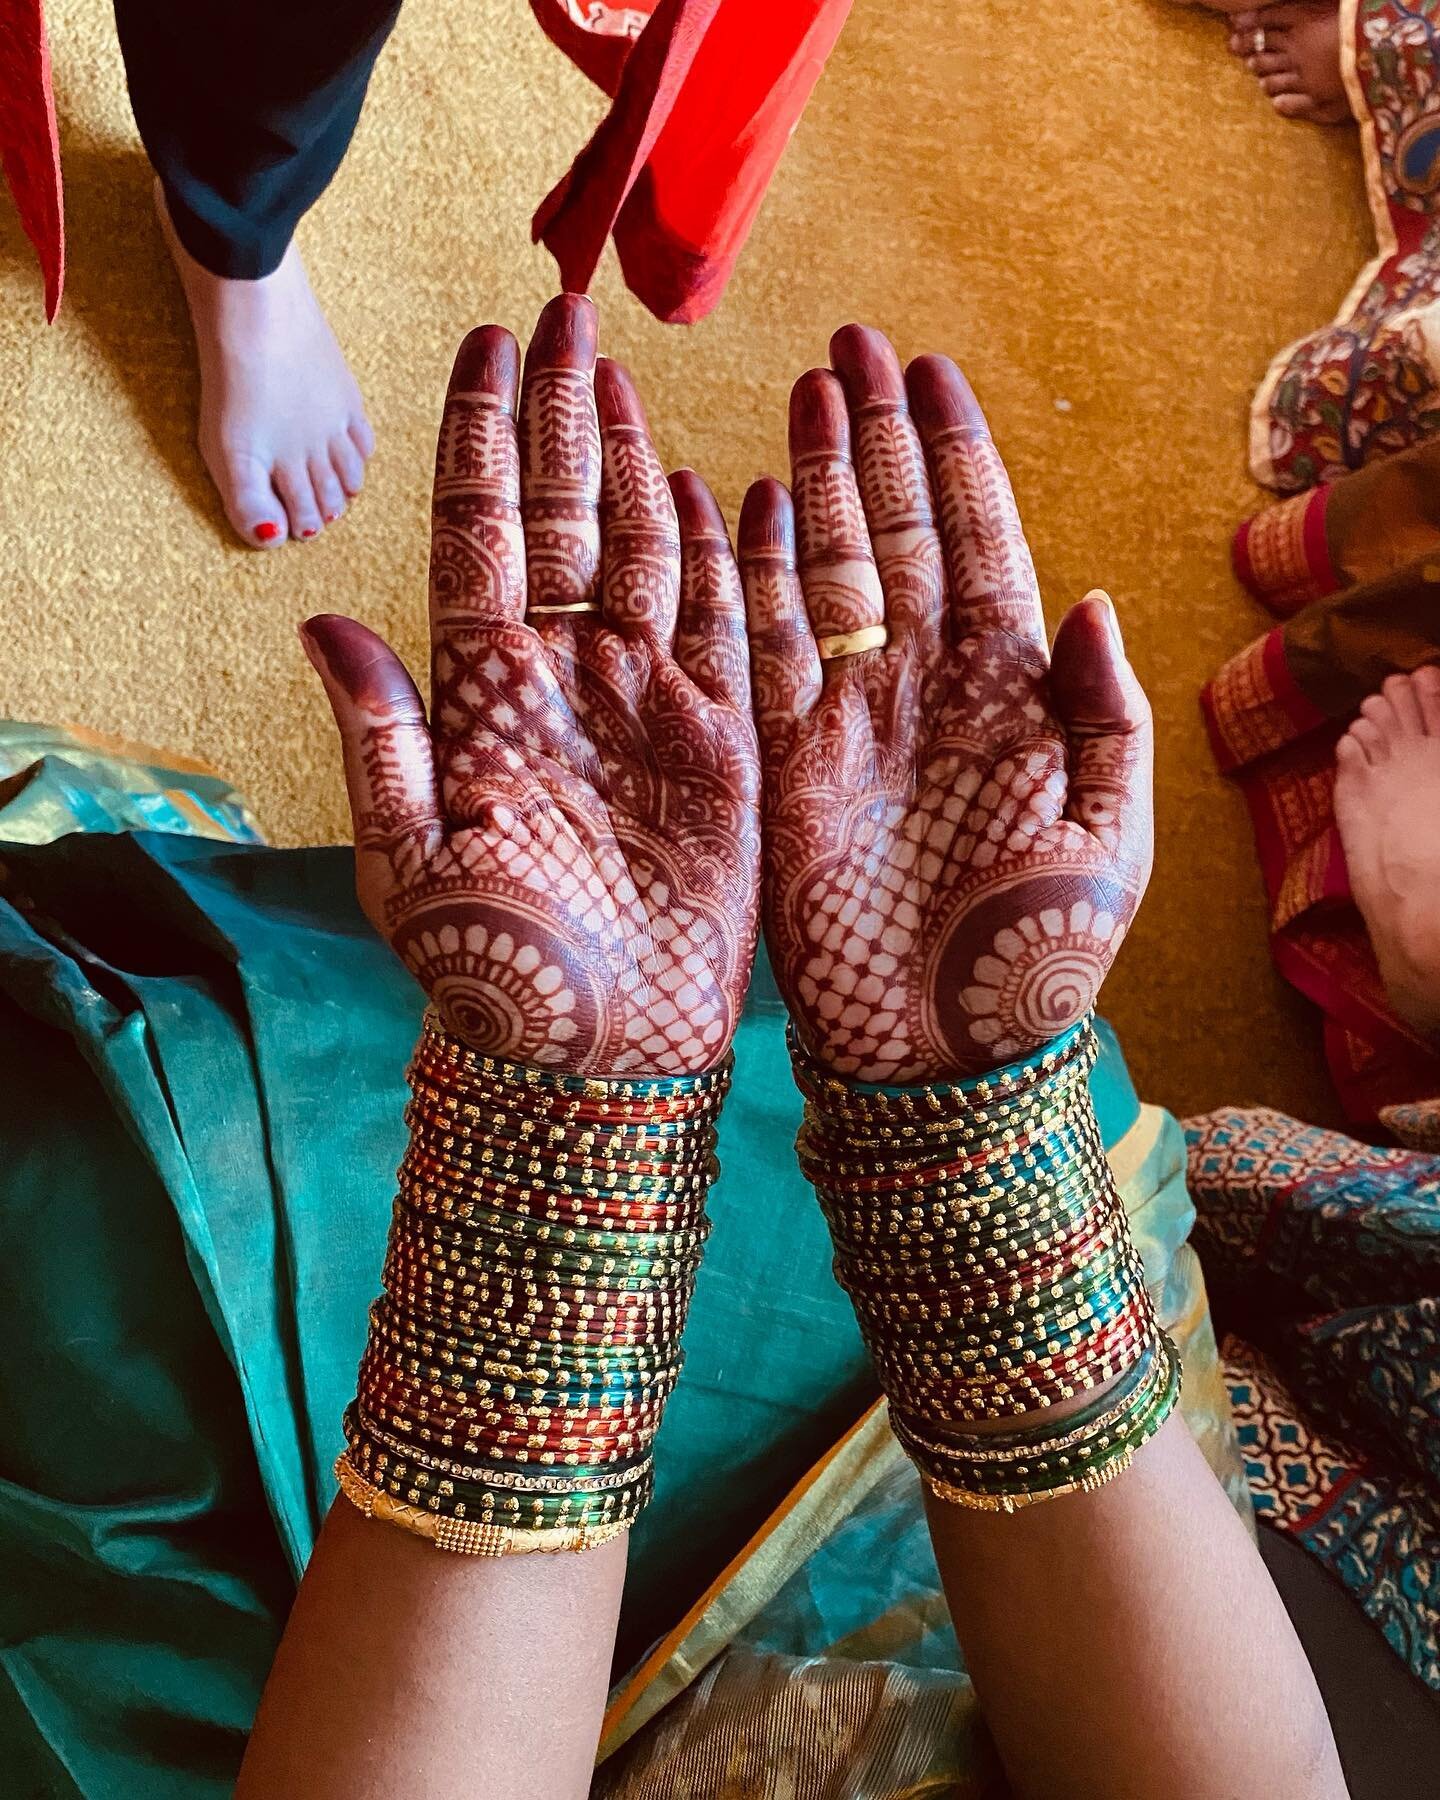 Recently I was invited to a Valaikappu, an Indian ceremony meant to bless the pregnant woman, celebrate her fertility, and ensure a safe birth. Differing from the classic idea of a baby shower, guests were involved in blessing the couple, filling the